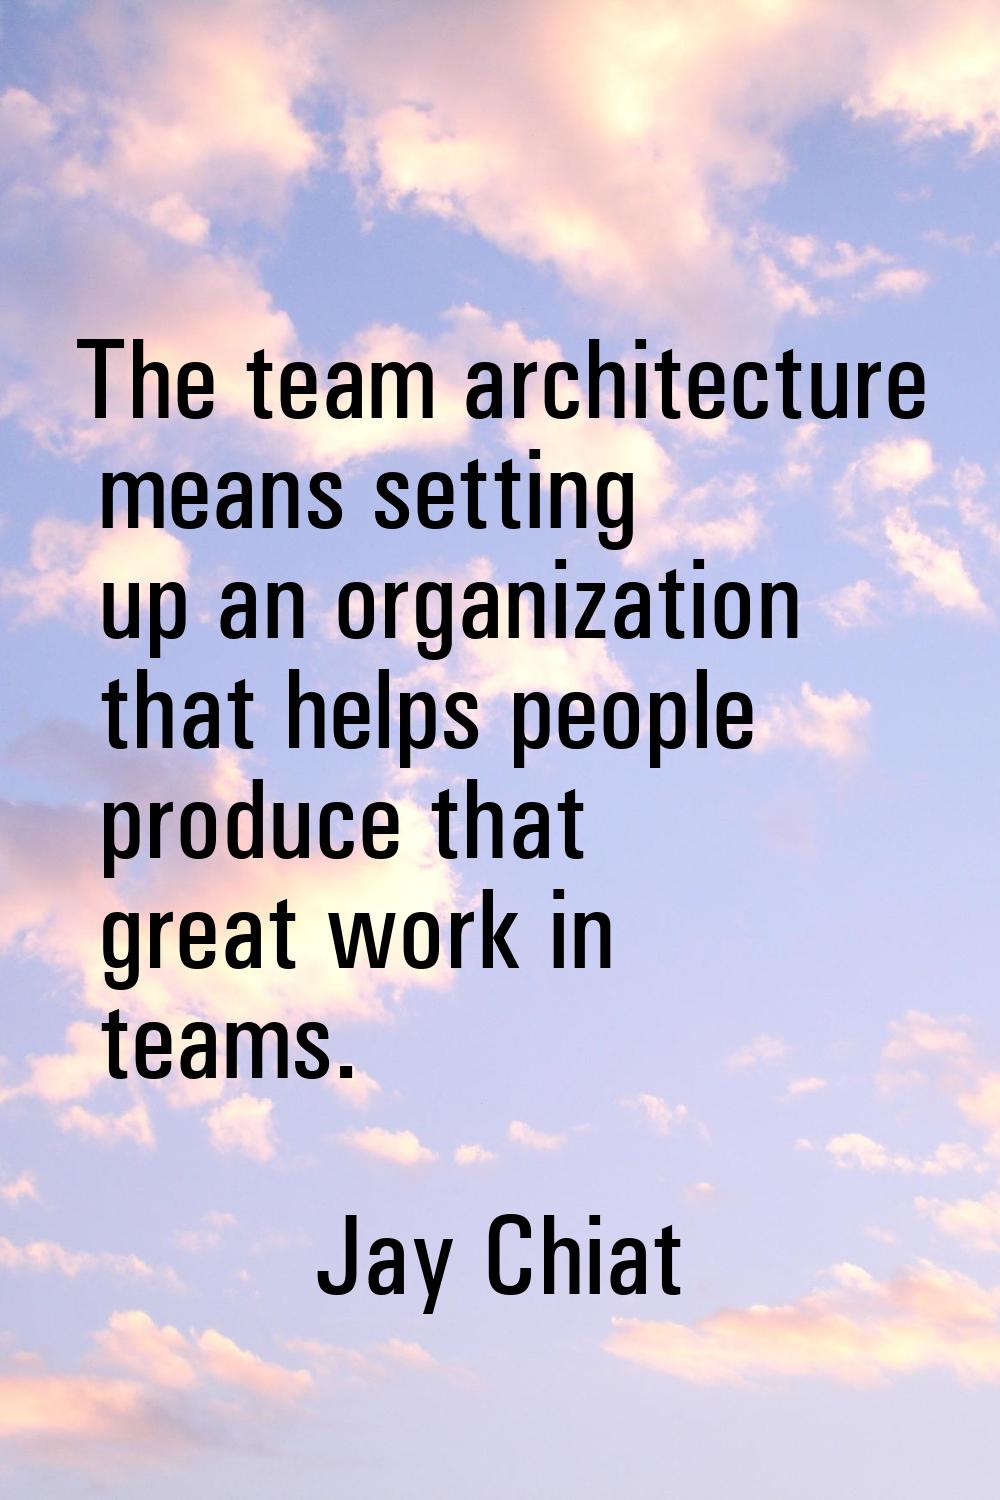 The team architecture means setting up an organization that helps people produce that great work in